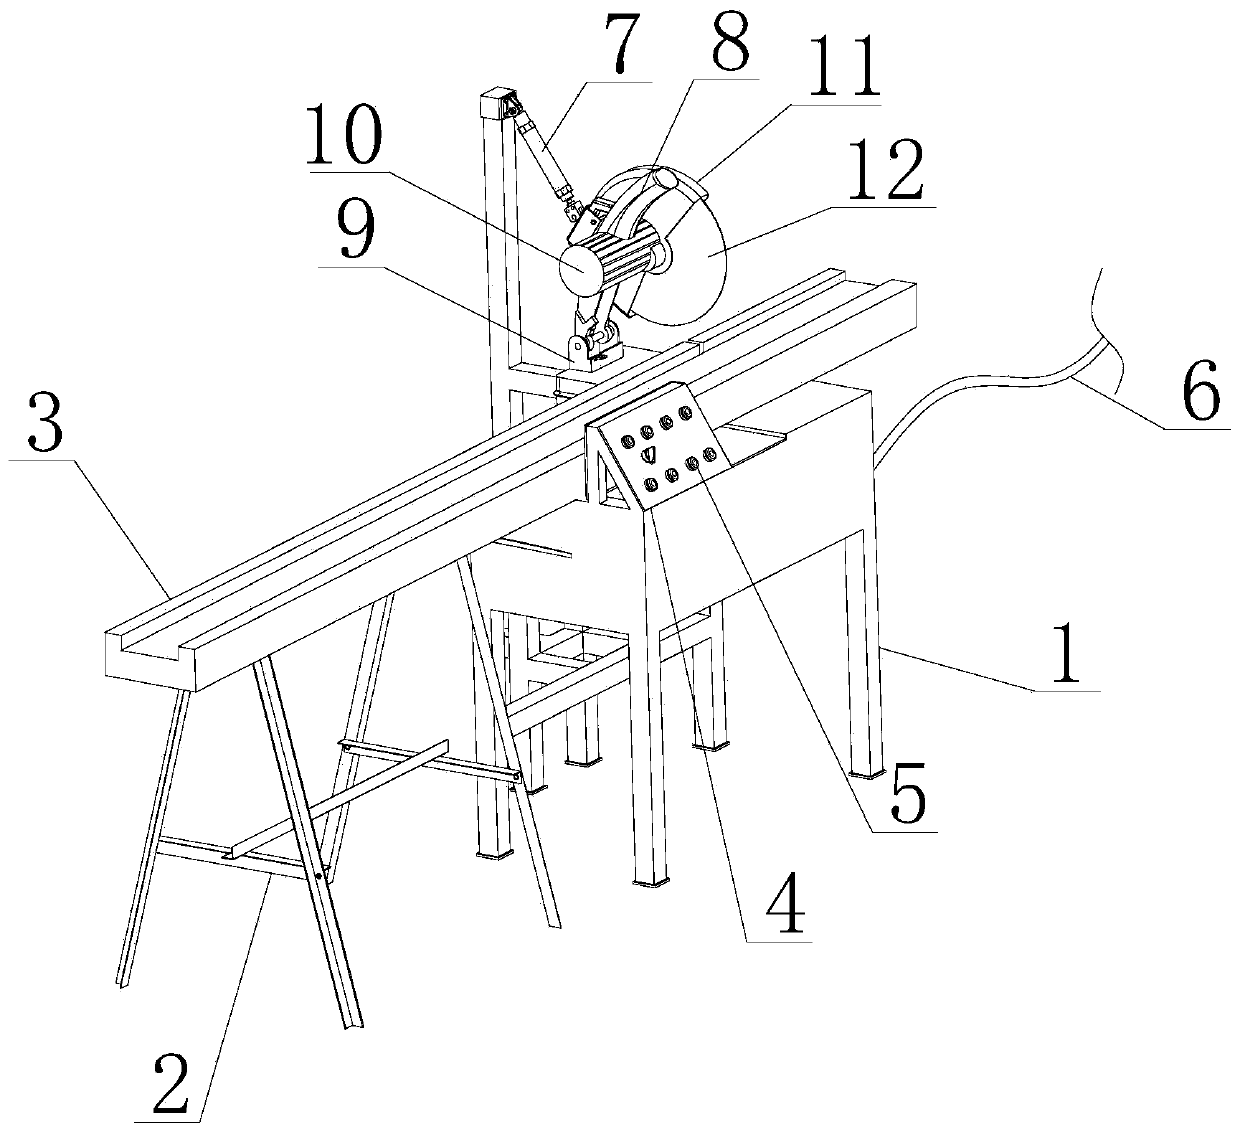 Novel cable cutting device for distribution line construction